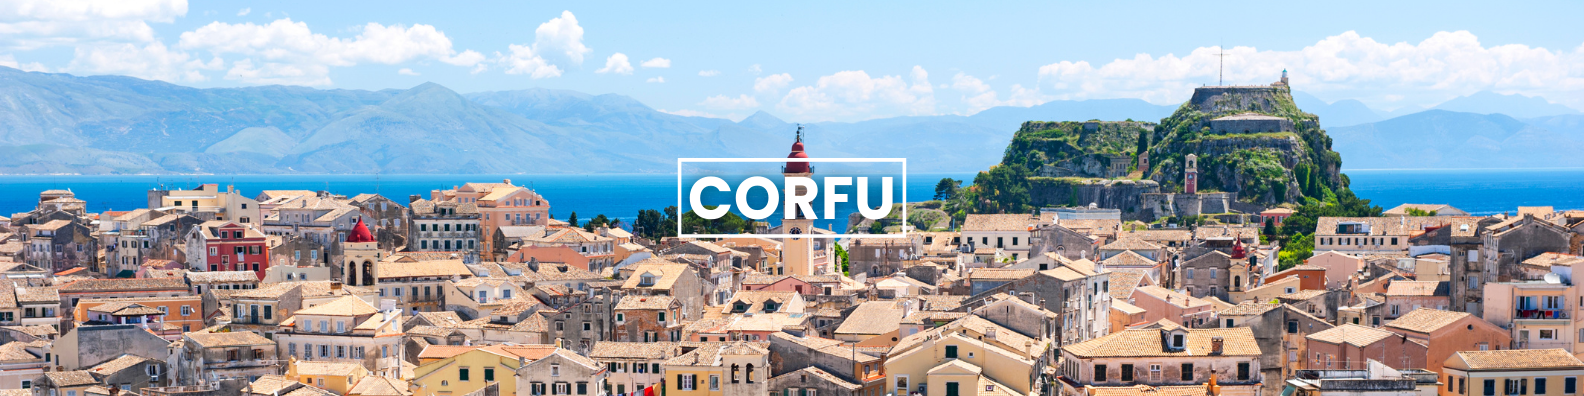 an aerial view of the city of corfu with a castle in the background . Barter's Travelnet 